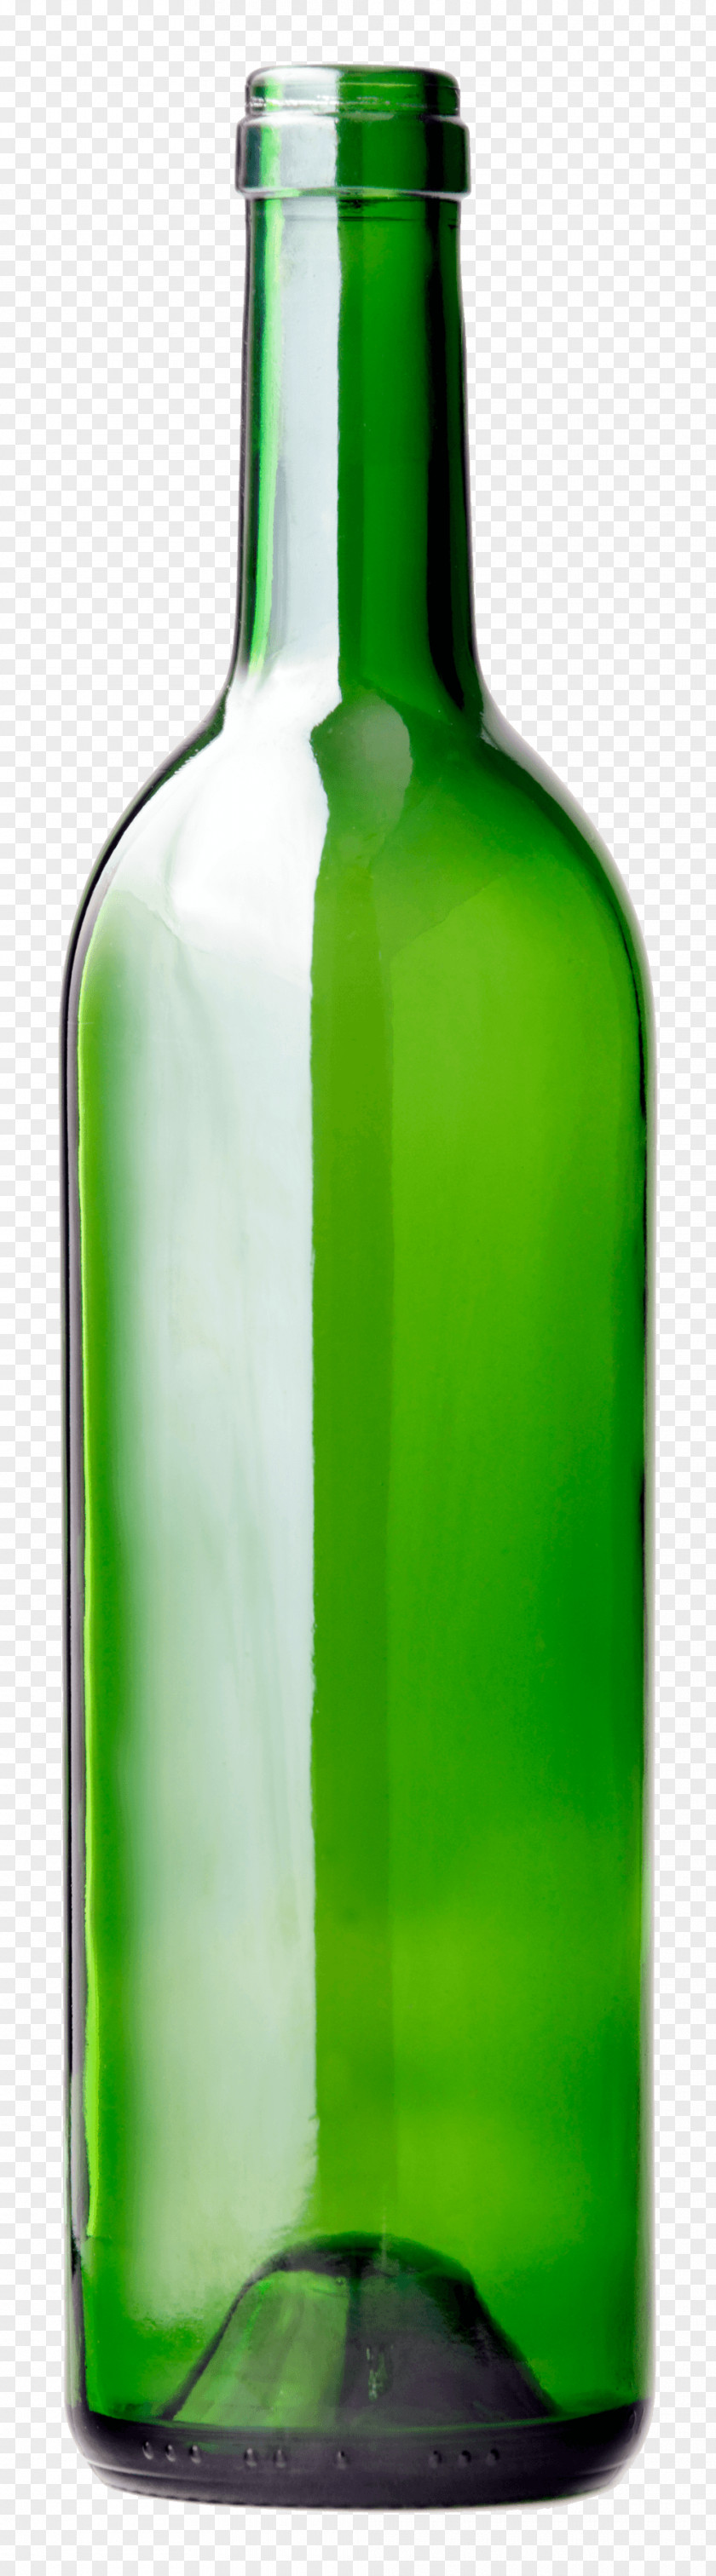 Glass Green Bottle Image Red Wine Butylka PNG